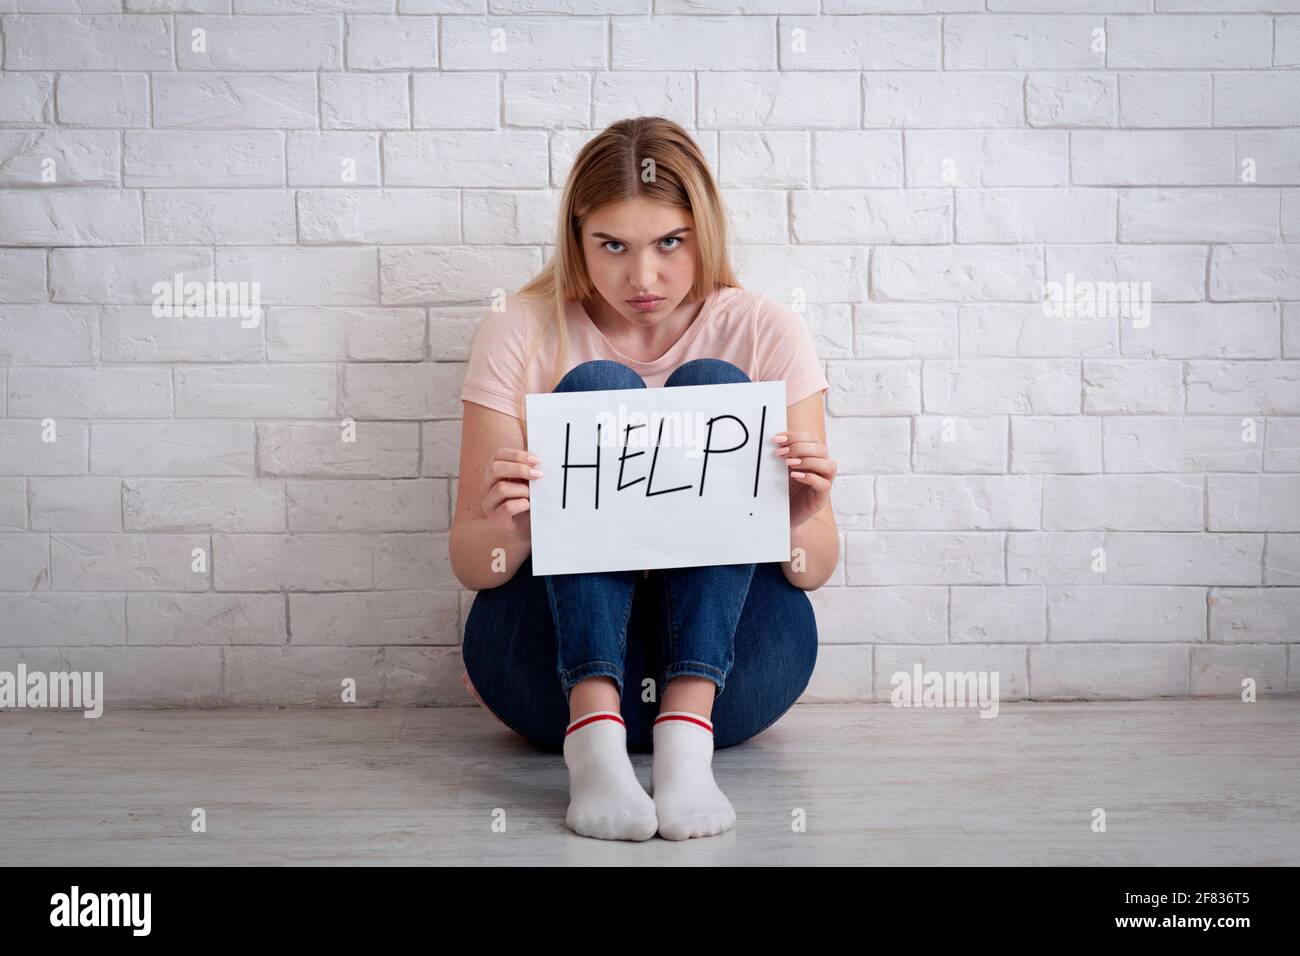 Asking for help, domestic violence and helplessness Stock Photo